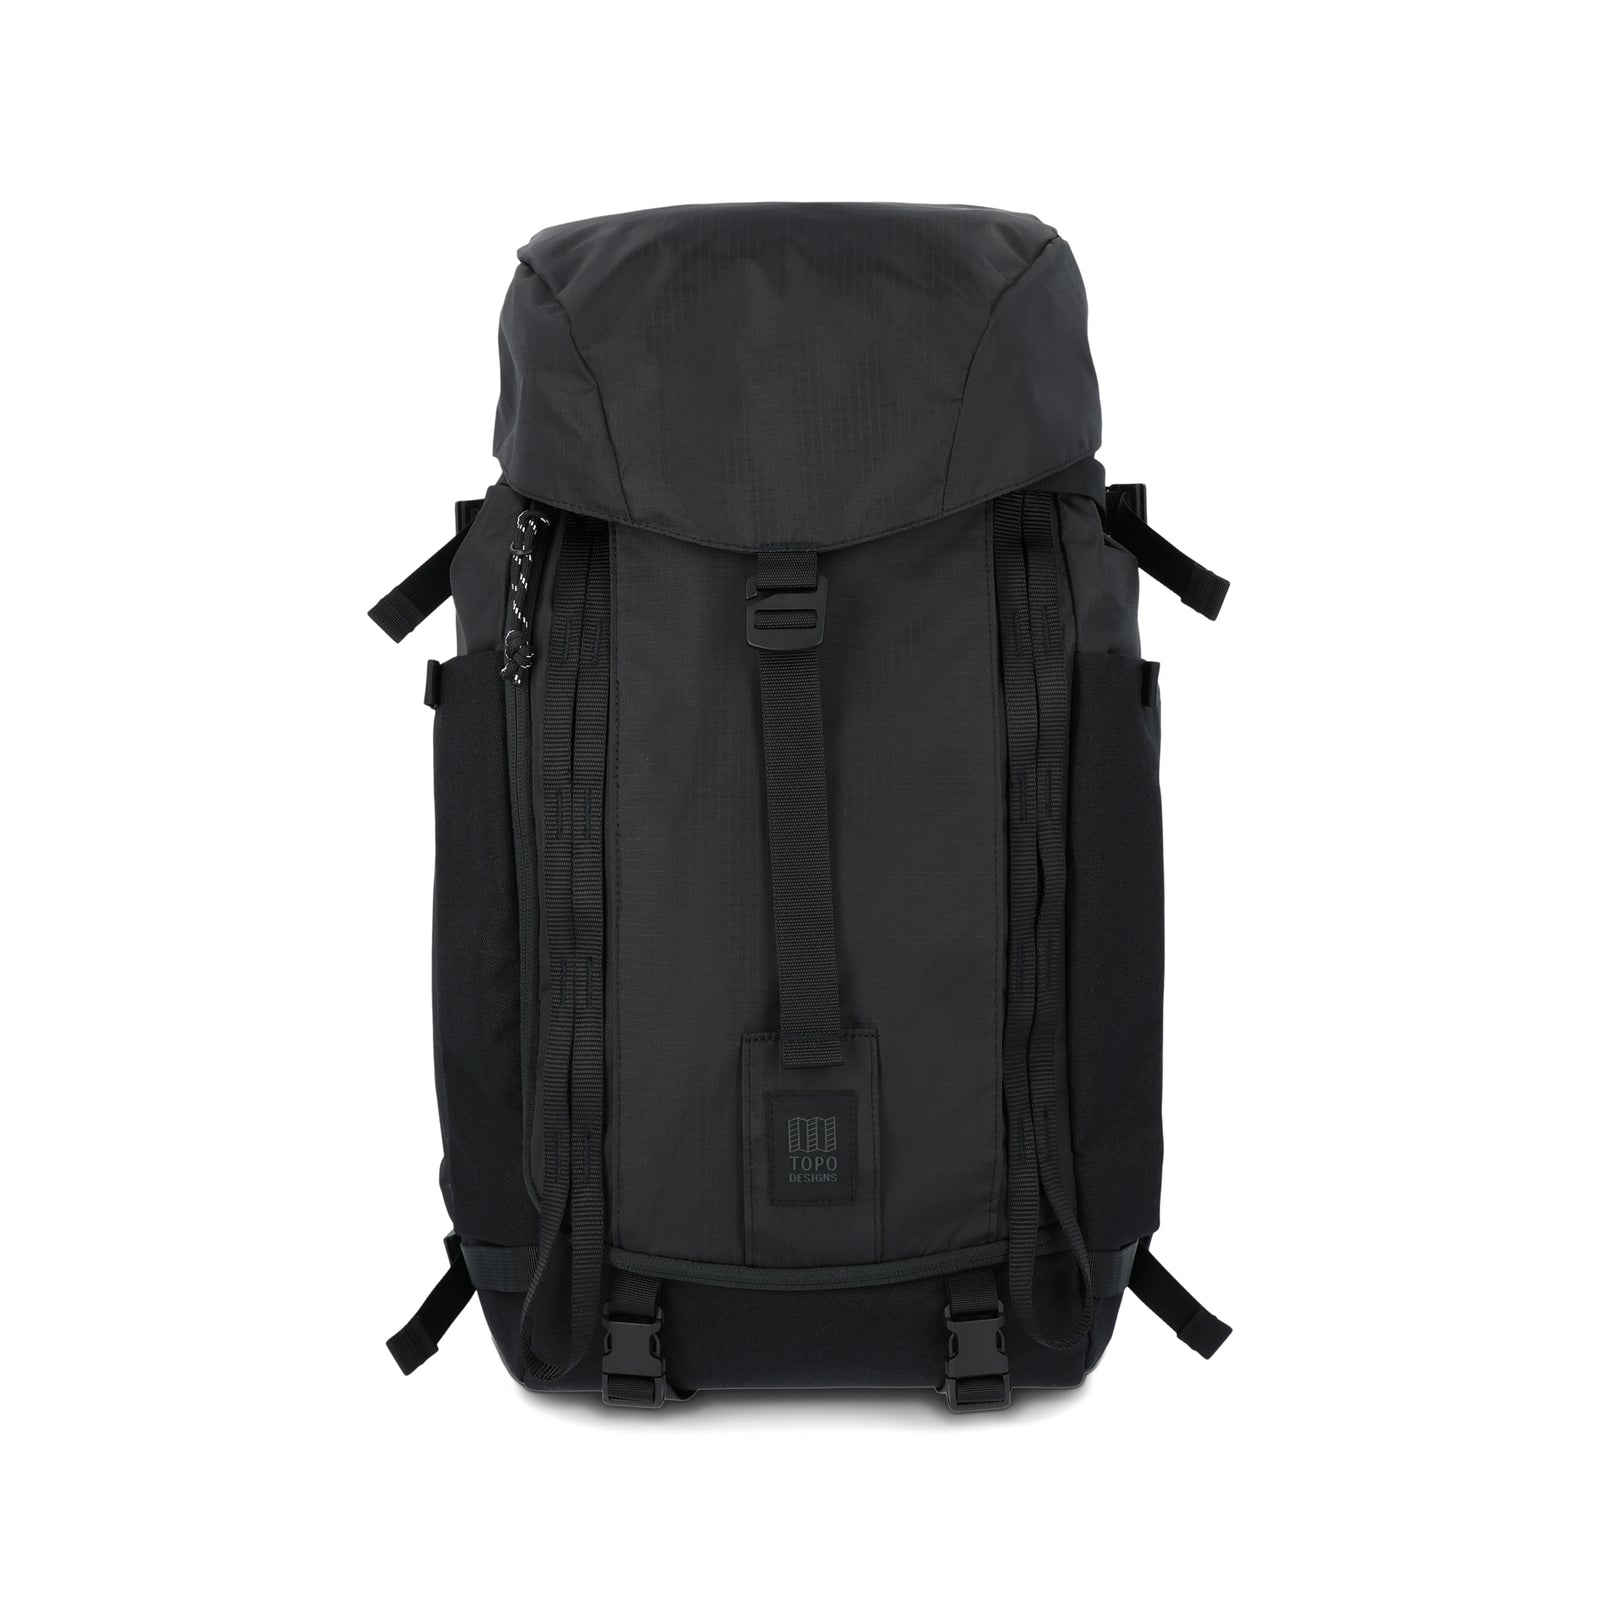 Topo Designs Mountain Pack 28L hiking backpack with external laptop sleeve access in lightweight recycled "Black" nylon.